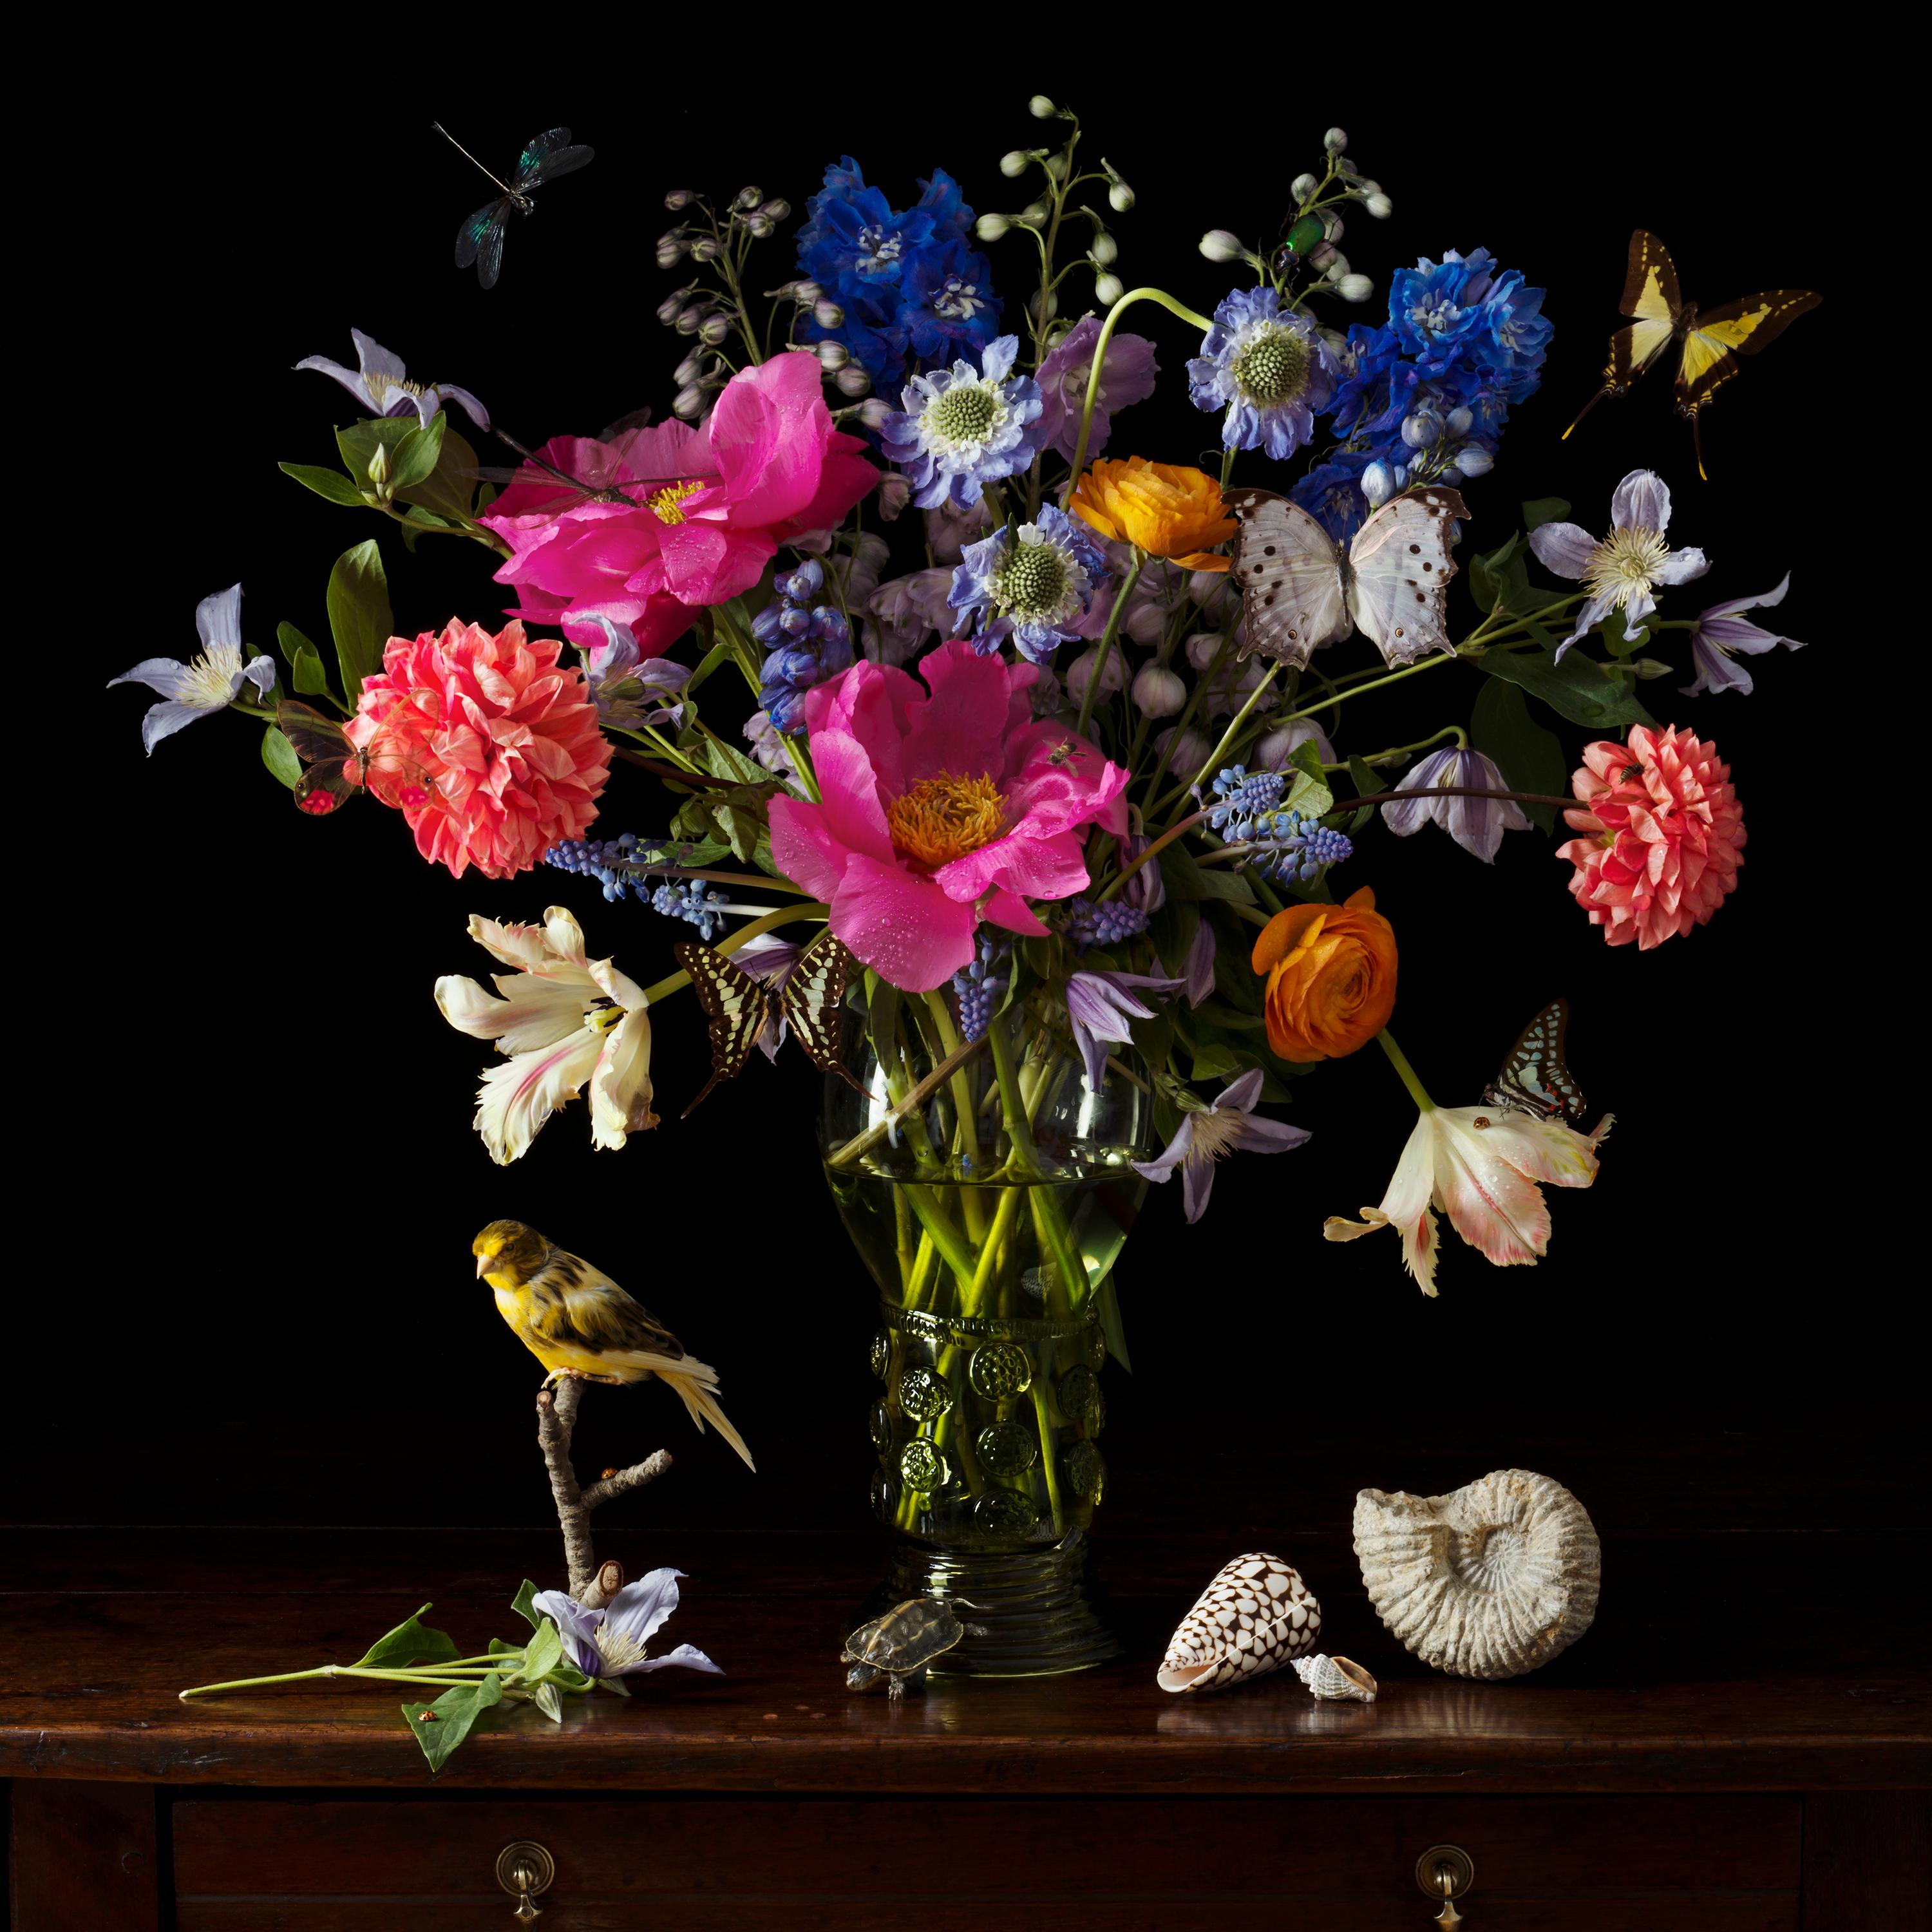 Paulette Tavormina Still-Life Photograph - Dutch Flowers, Yellow Canary & Turtle - 24 x 24 inches